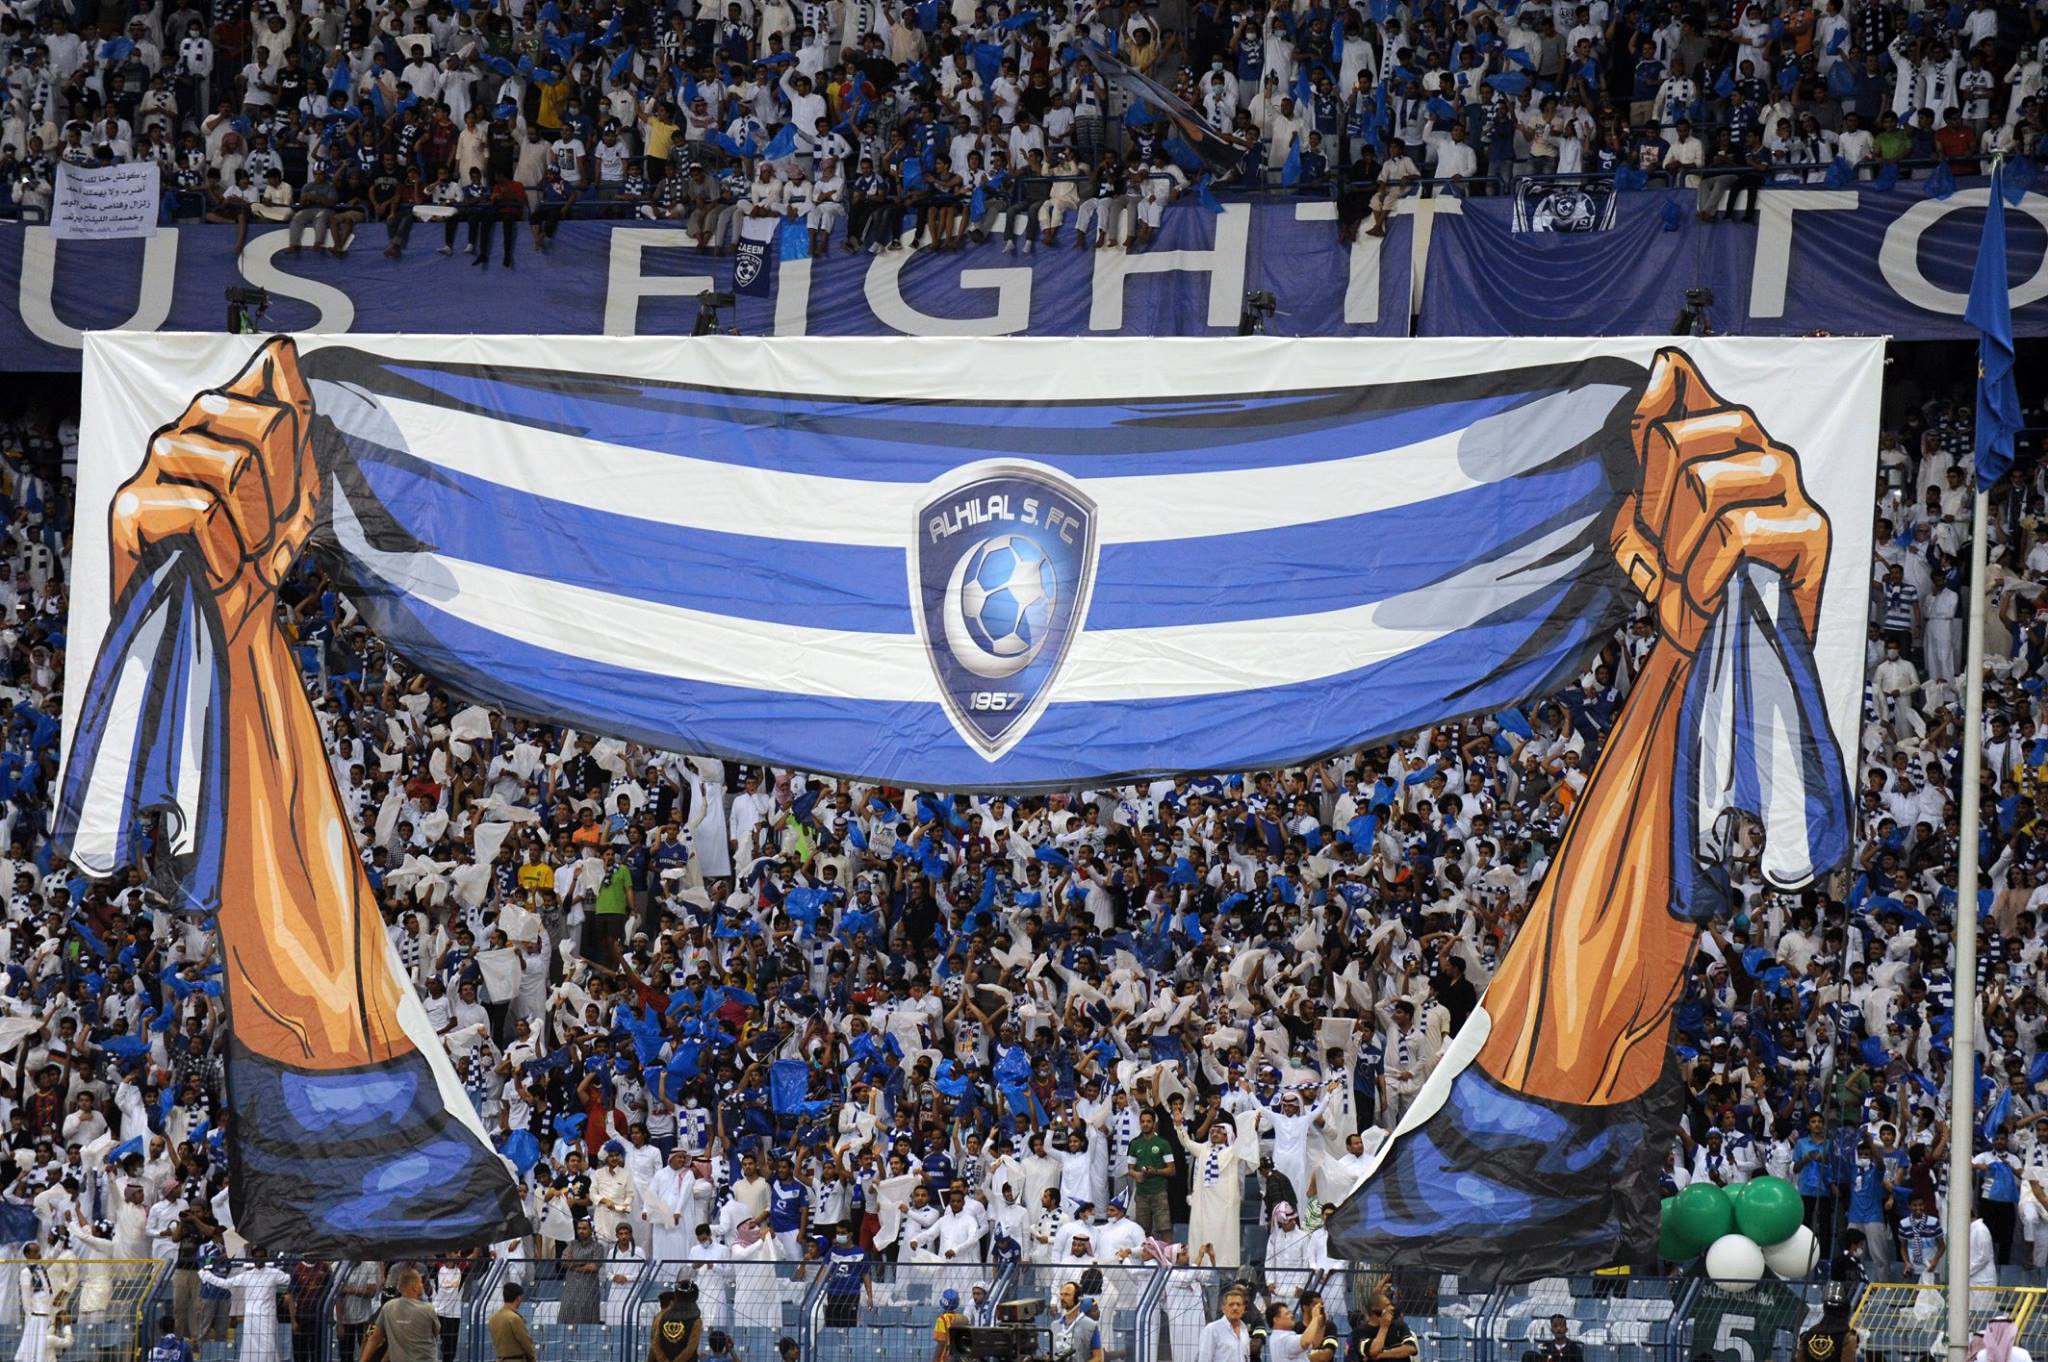 OPINION: Al Hilal is biggest club - The Asian Game